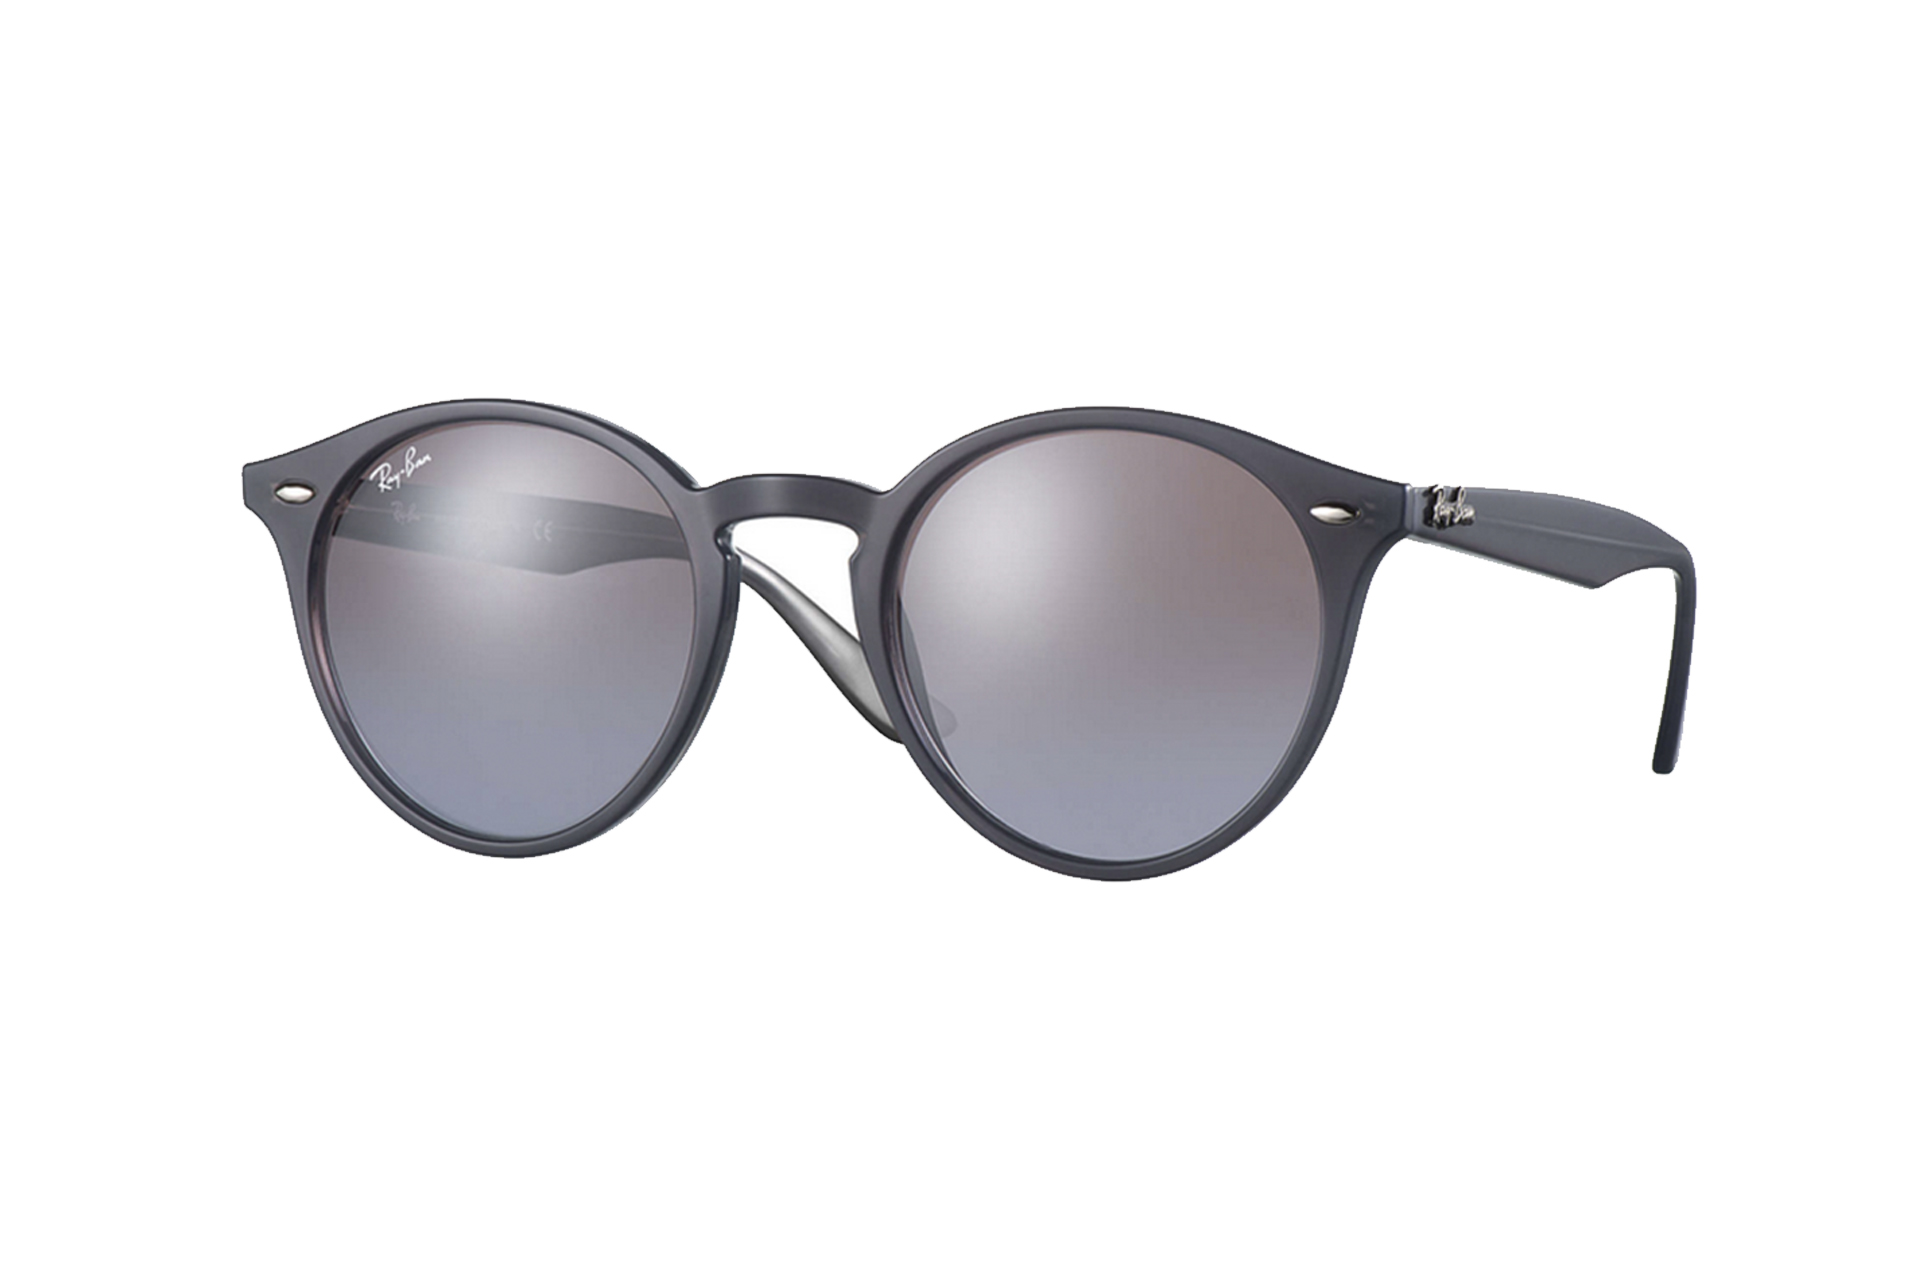 ray-ban-grey-round-frame-sunglasses-rb2180-6230-94-49-p8955-13955_zoom